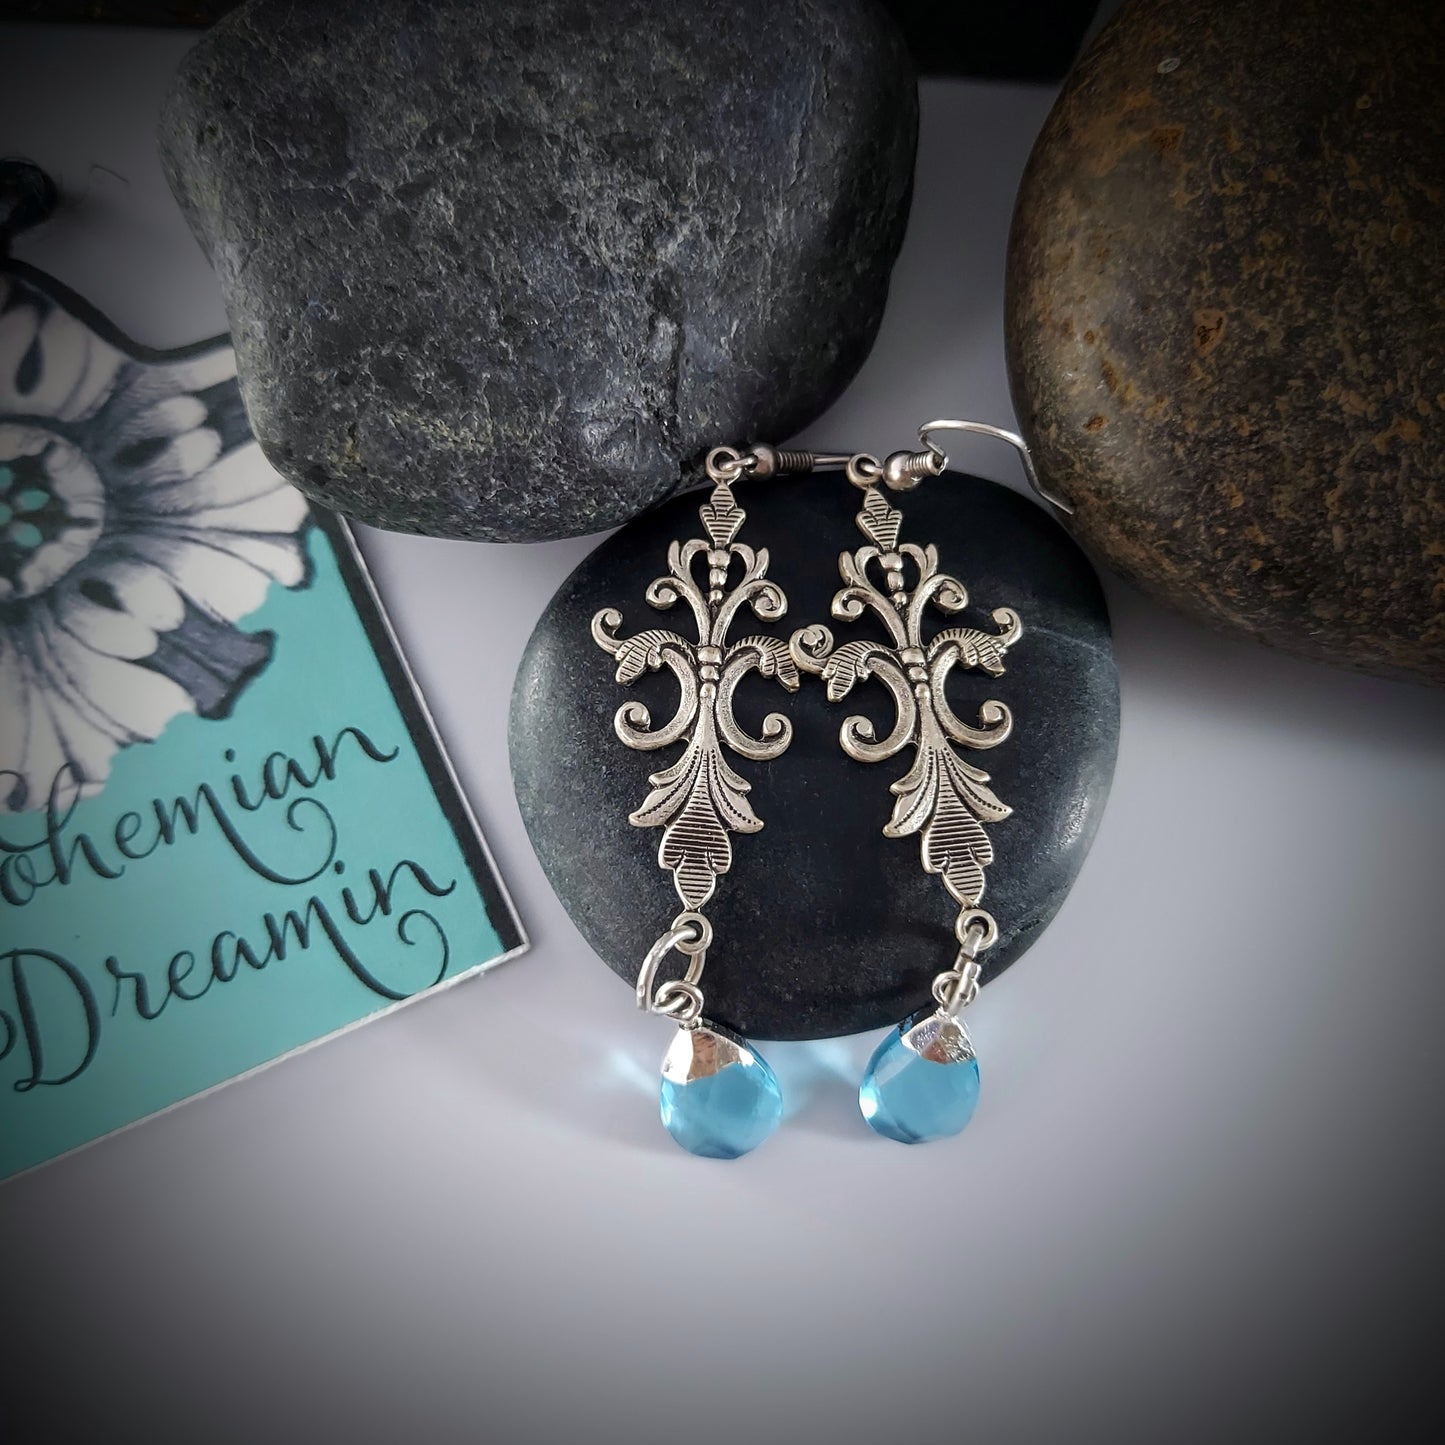 Created in our studio, these unique earrings are lightweight and so beautiful to wear! The stunning Blue Topaz dangles from an Art Nouveau Style Filigree base. Really lovely on!
 
Comes in a Black Velvet drawstring bag for safe keeping, or gifting.

 2.5" length with hooks

Genuine Labradorite and Amazonite, Brass